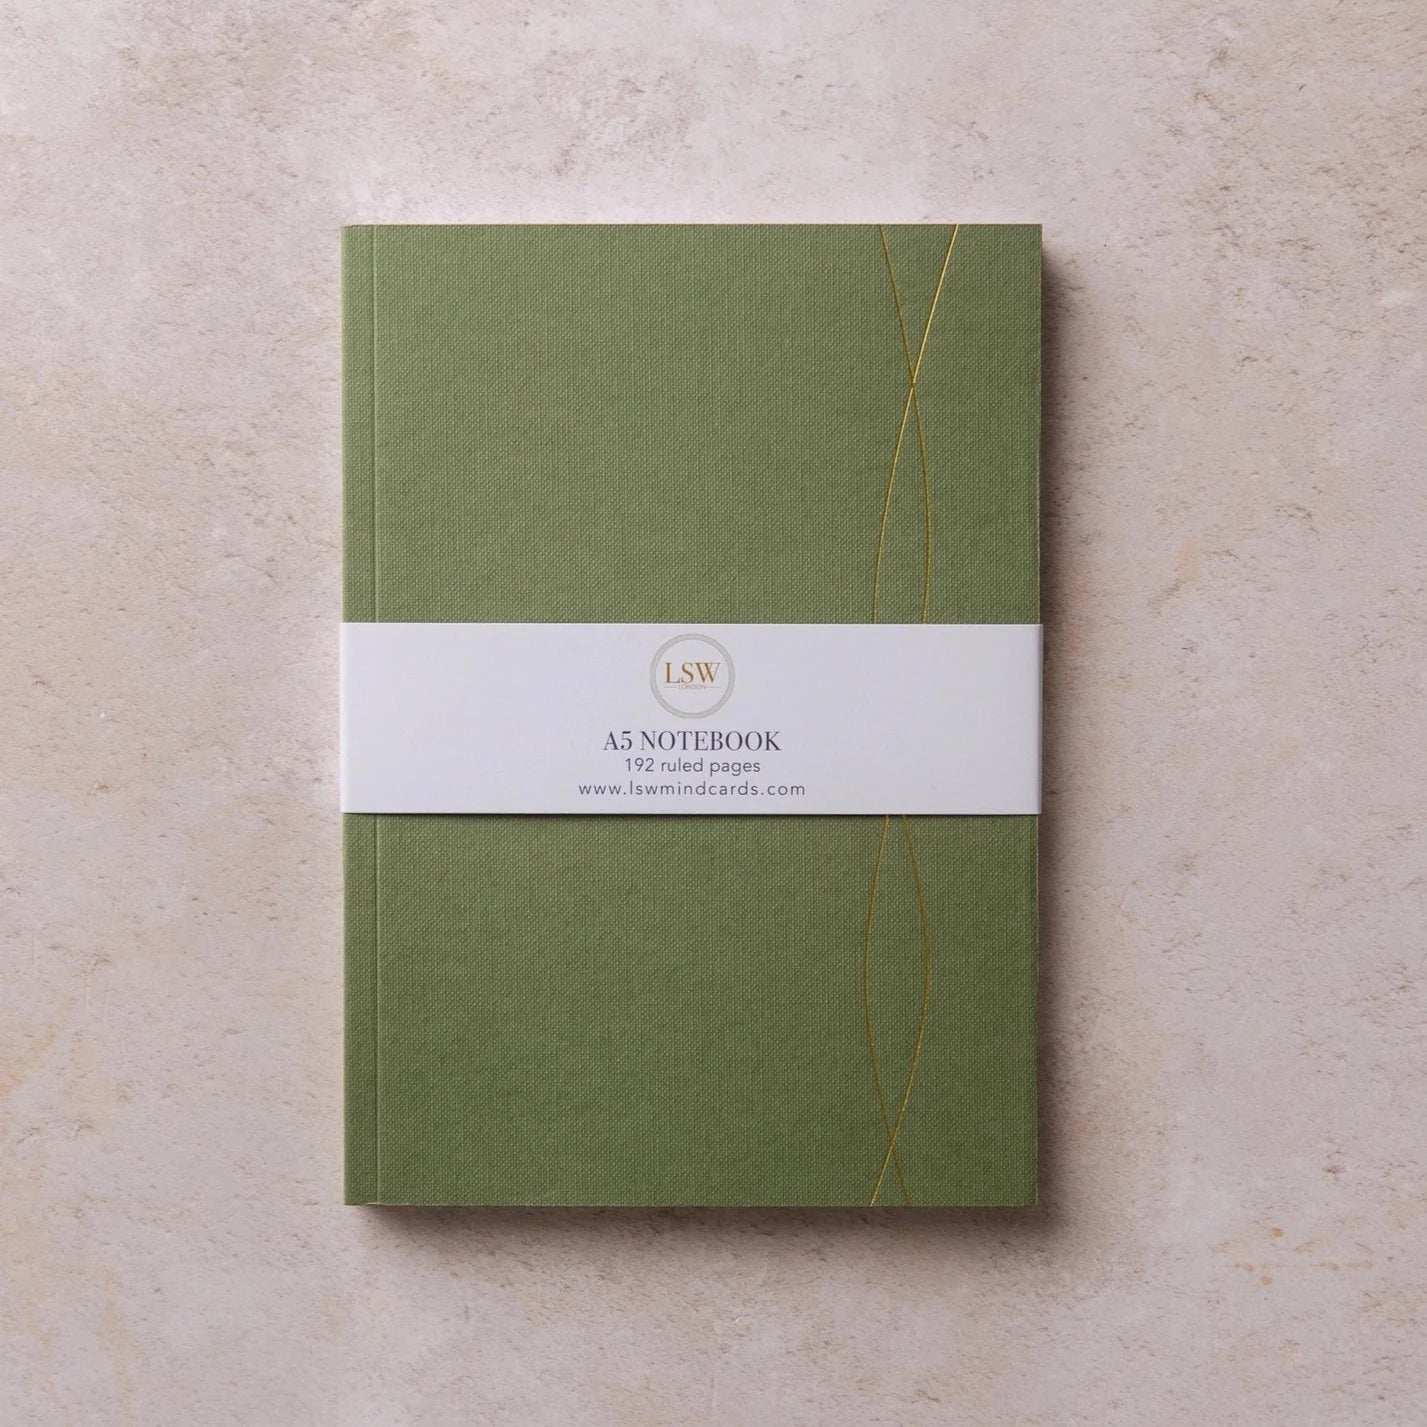 A5 Notebook - Mid Green by LSW